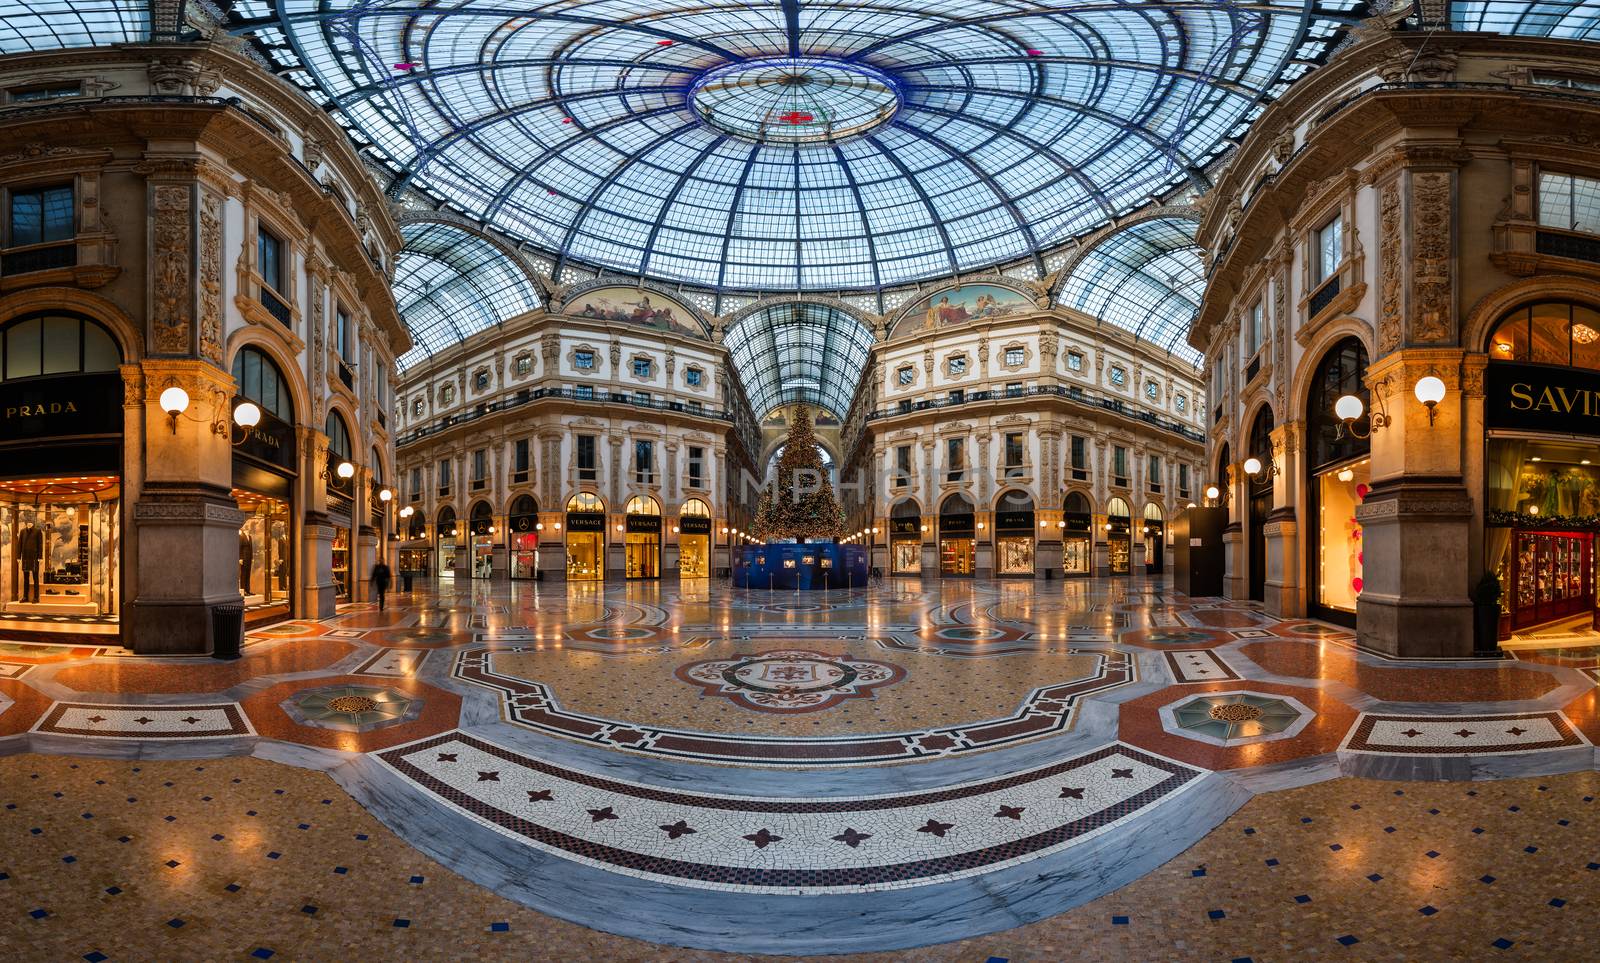 MILAN, ITALY - JANUARY 2, 2015:  Galleria Vittorio Emanuele II in Milan. It's one of the world's oldest shopping malls, designed and built by Giuseppe Mengoni between 1865 and 1877.